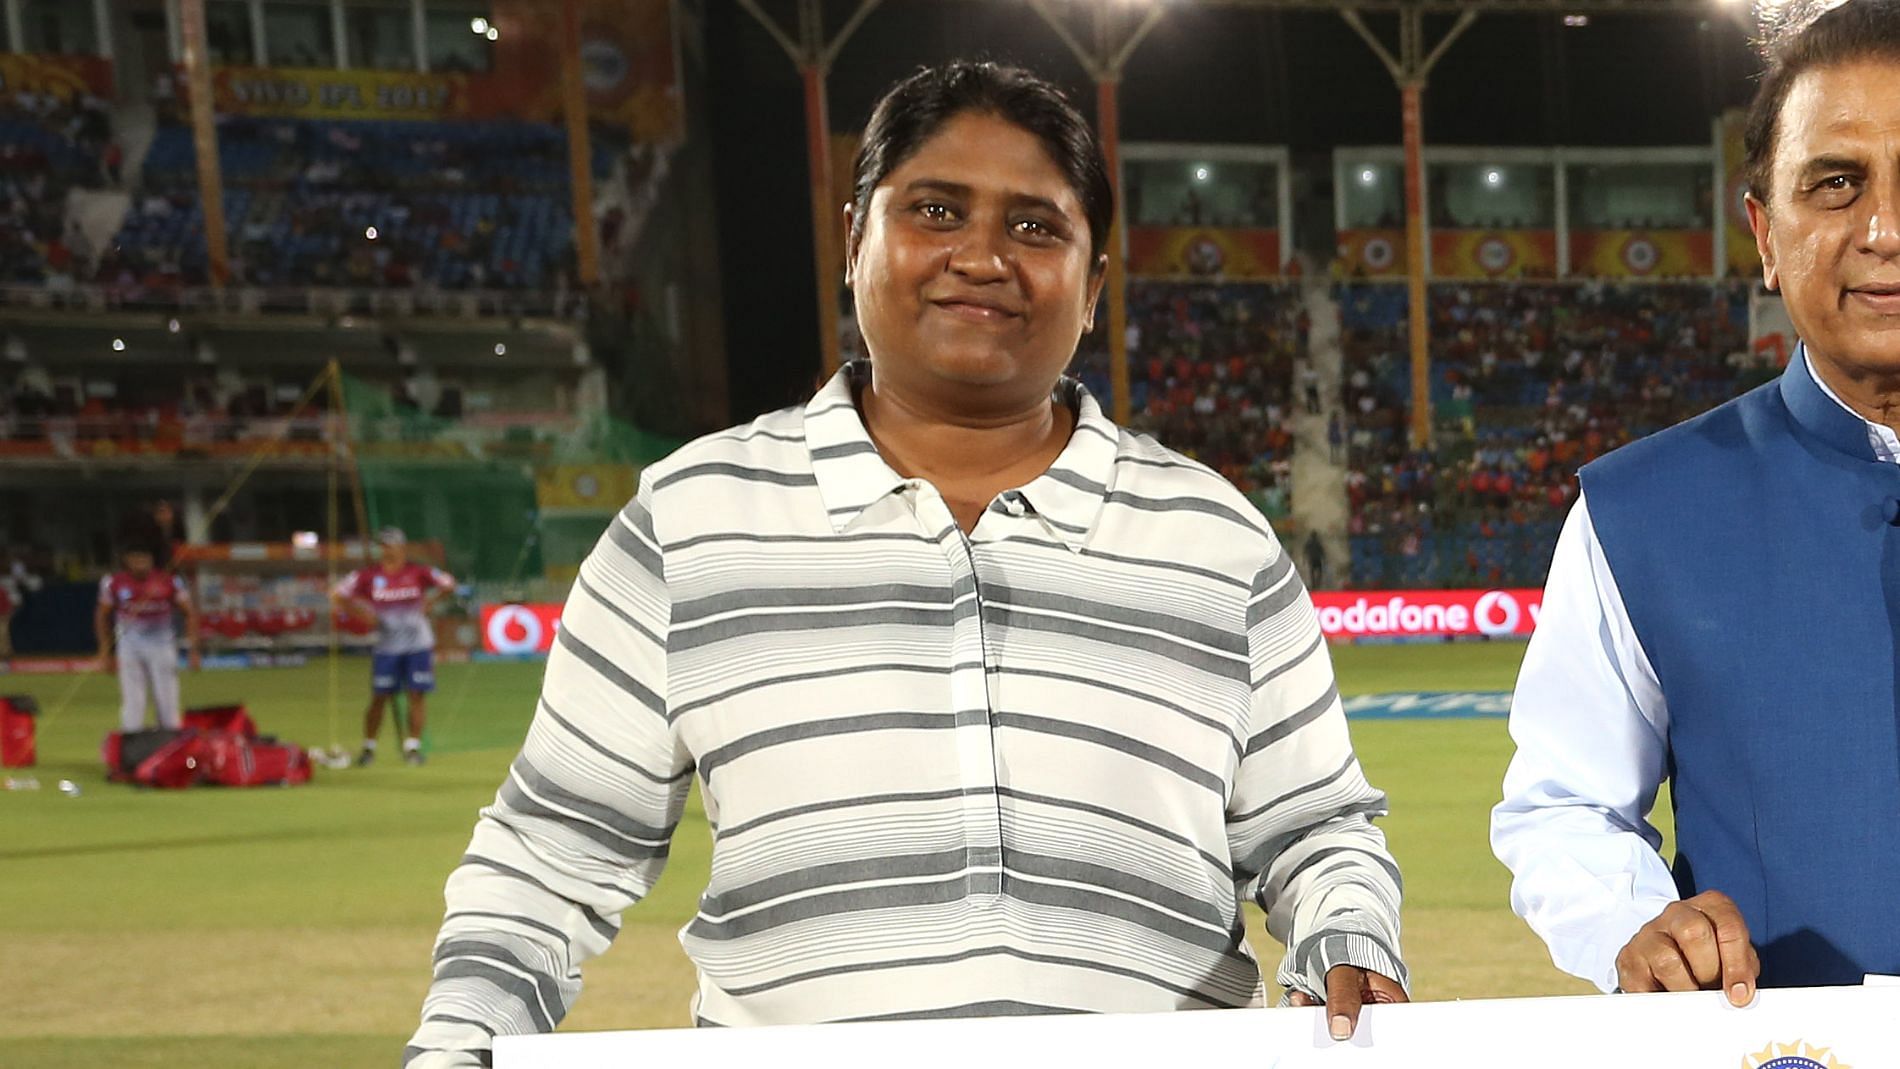 Former India spinner Neetu David has been appointed chairperson of a new five-member senior women’s selection panel.